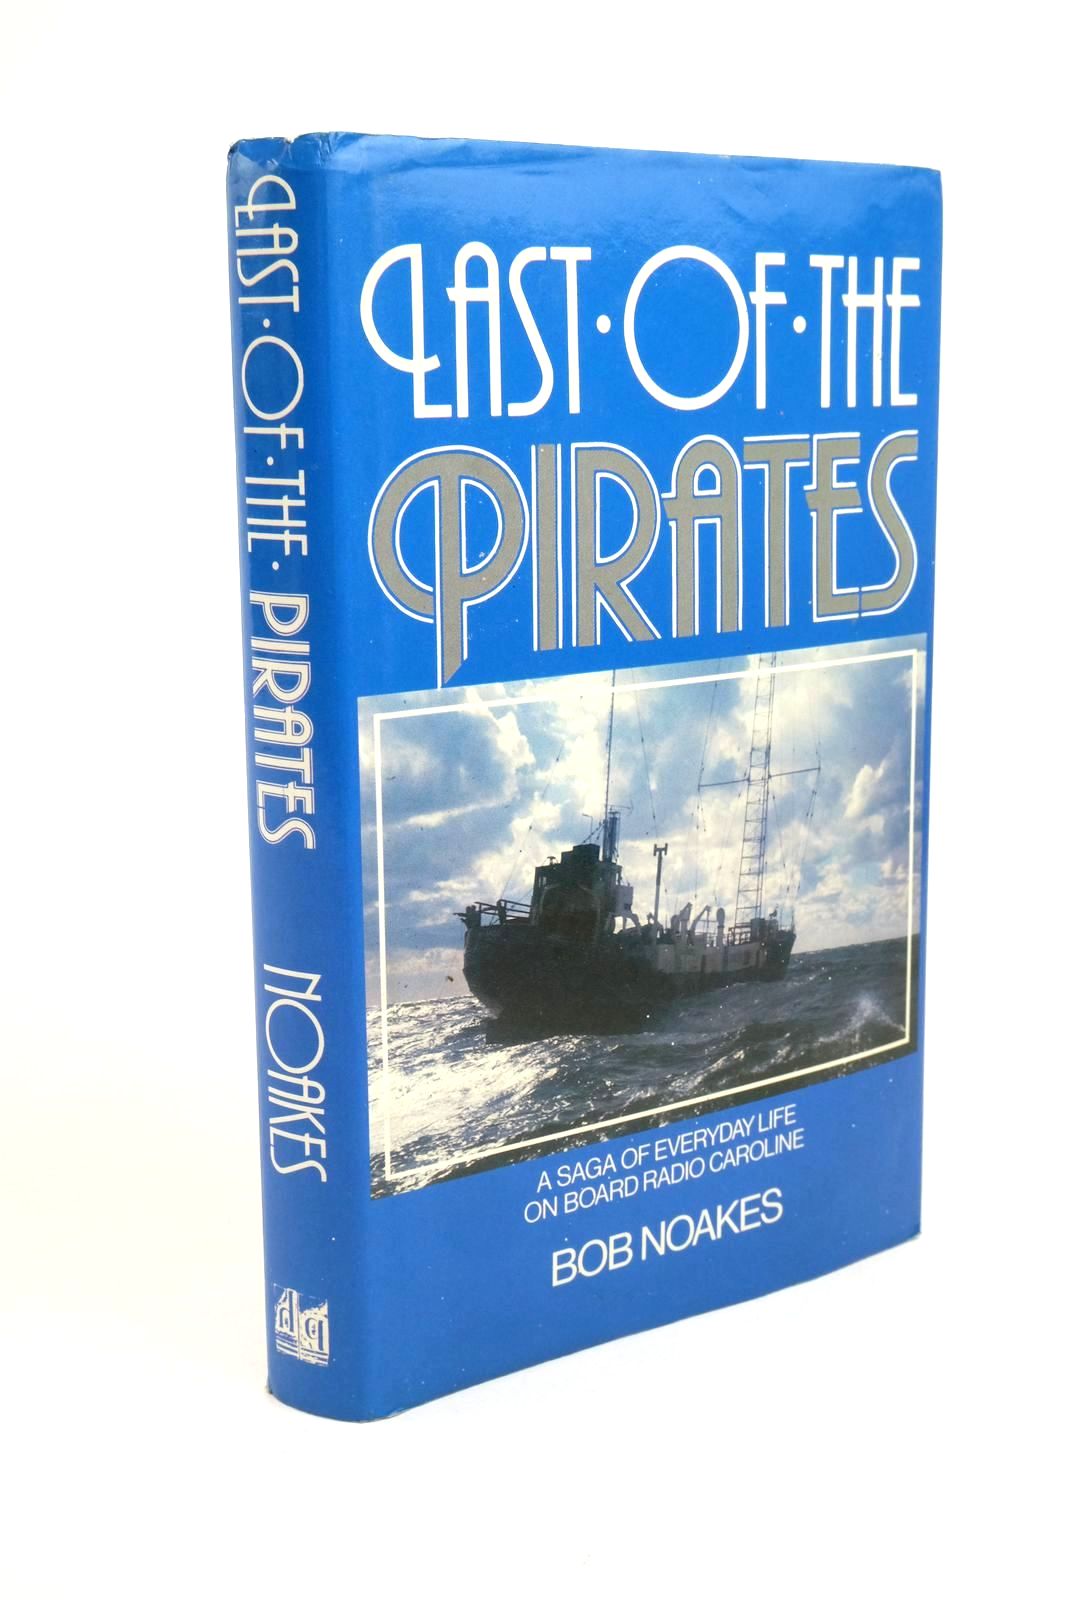 Photo of LAST OF THE PIRATES written by Noakes, Bob published by Paul Harris Publishing (STOCK CODE: 1322311)  for sale by Stella & Rose's Books